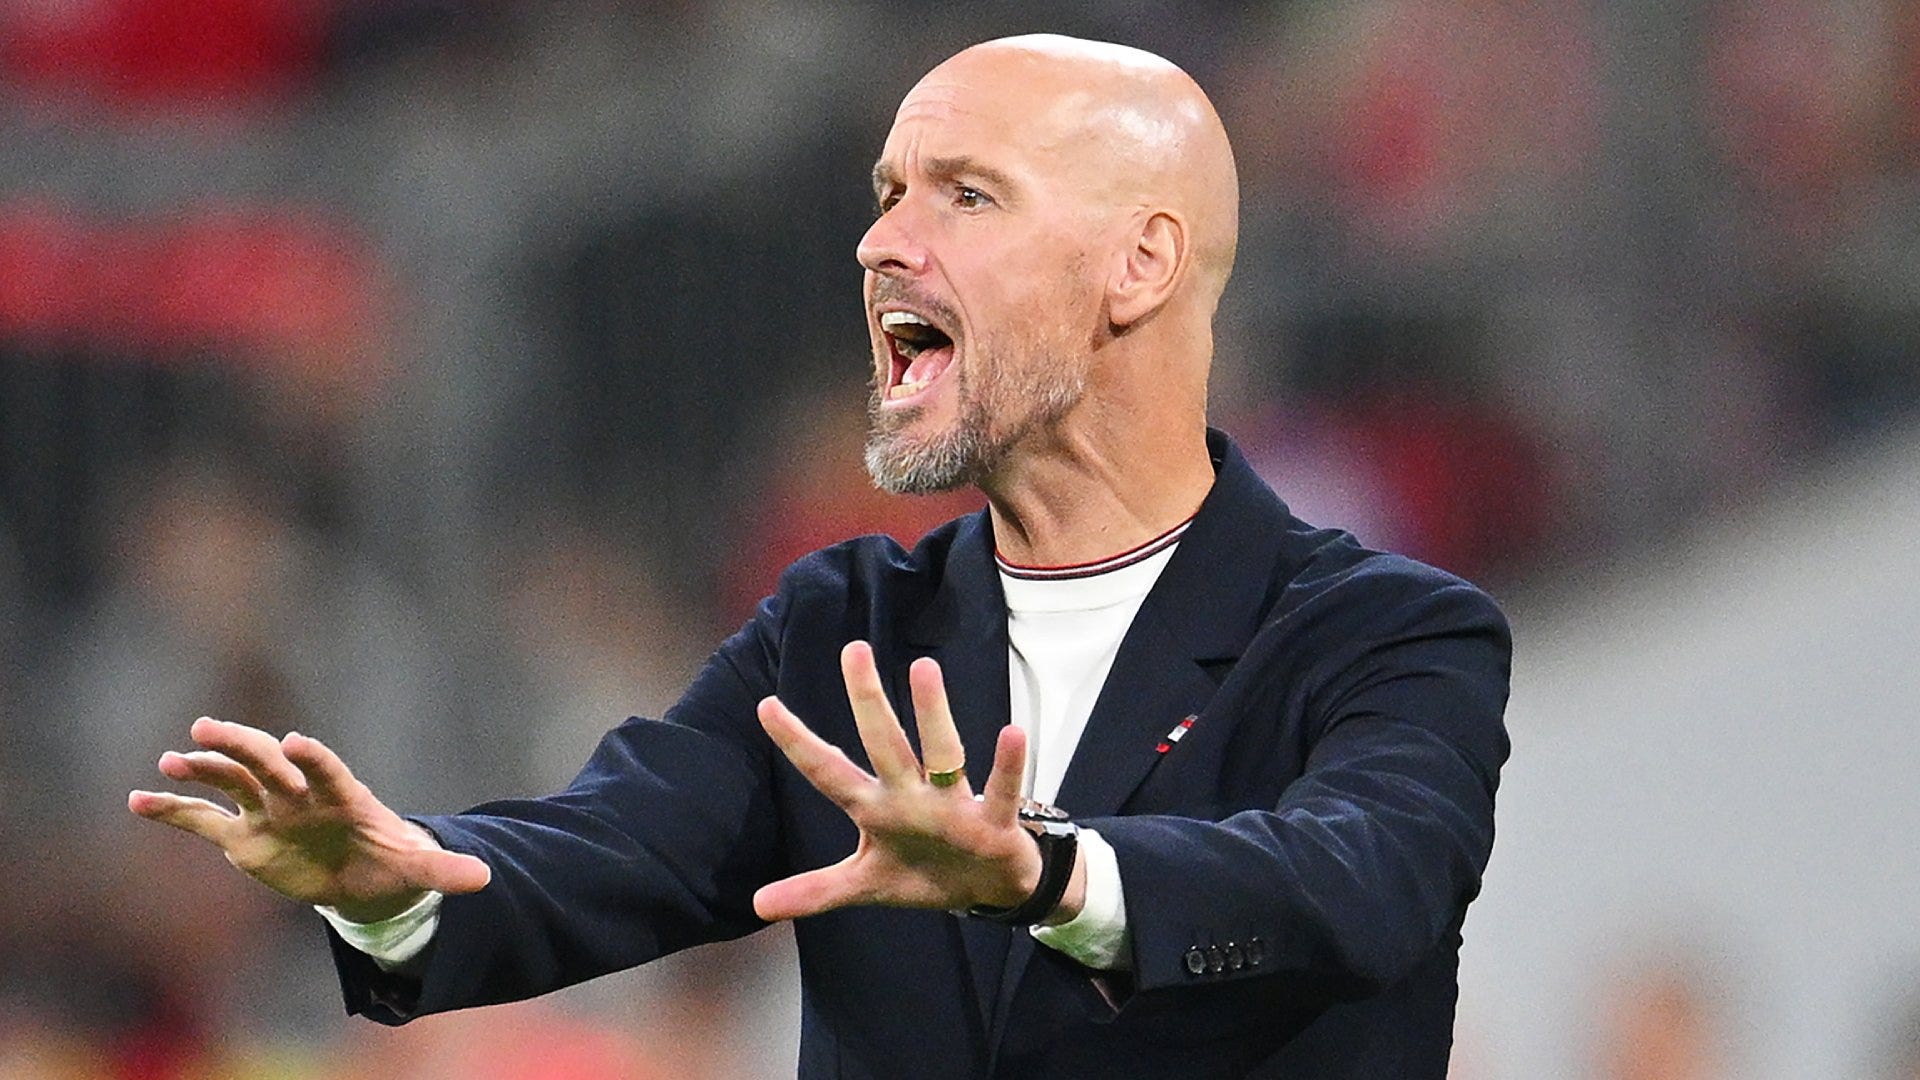 Division brewing at Man Utd? Players concerned by Erik ten Hag's criticism of certain individuals and believes manager has 'favourites' as discontent grows following disastrous start to season